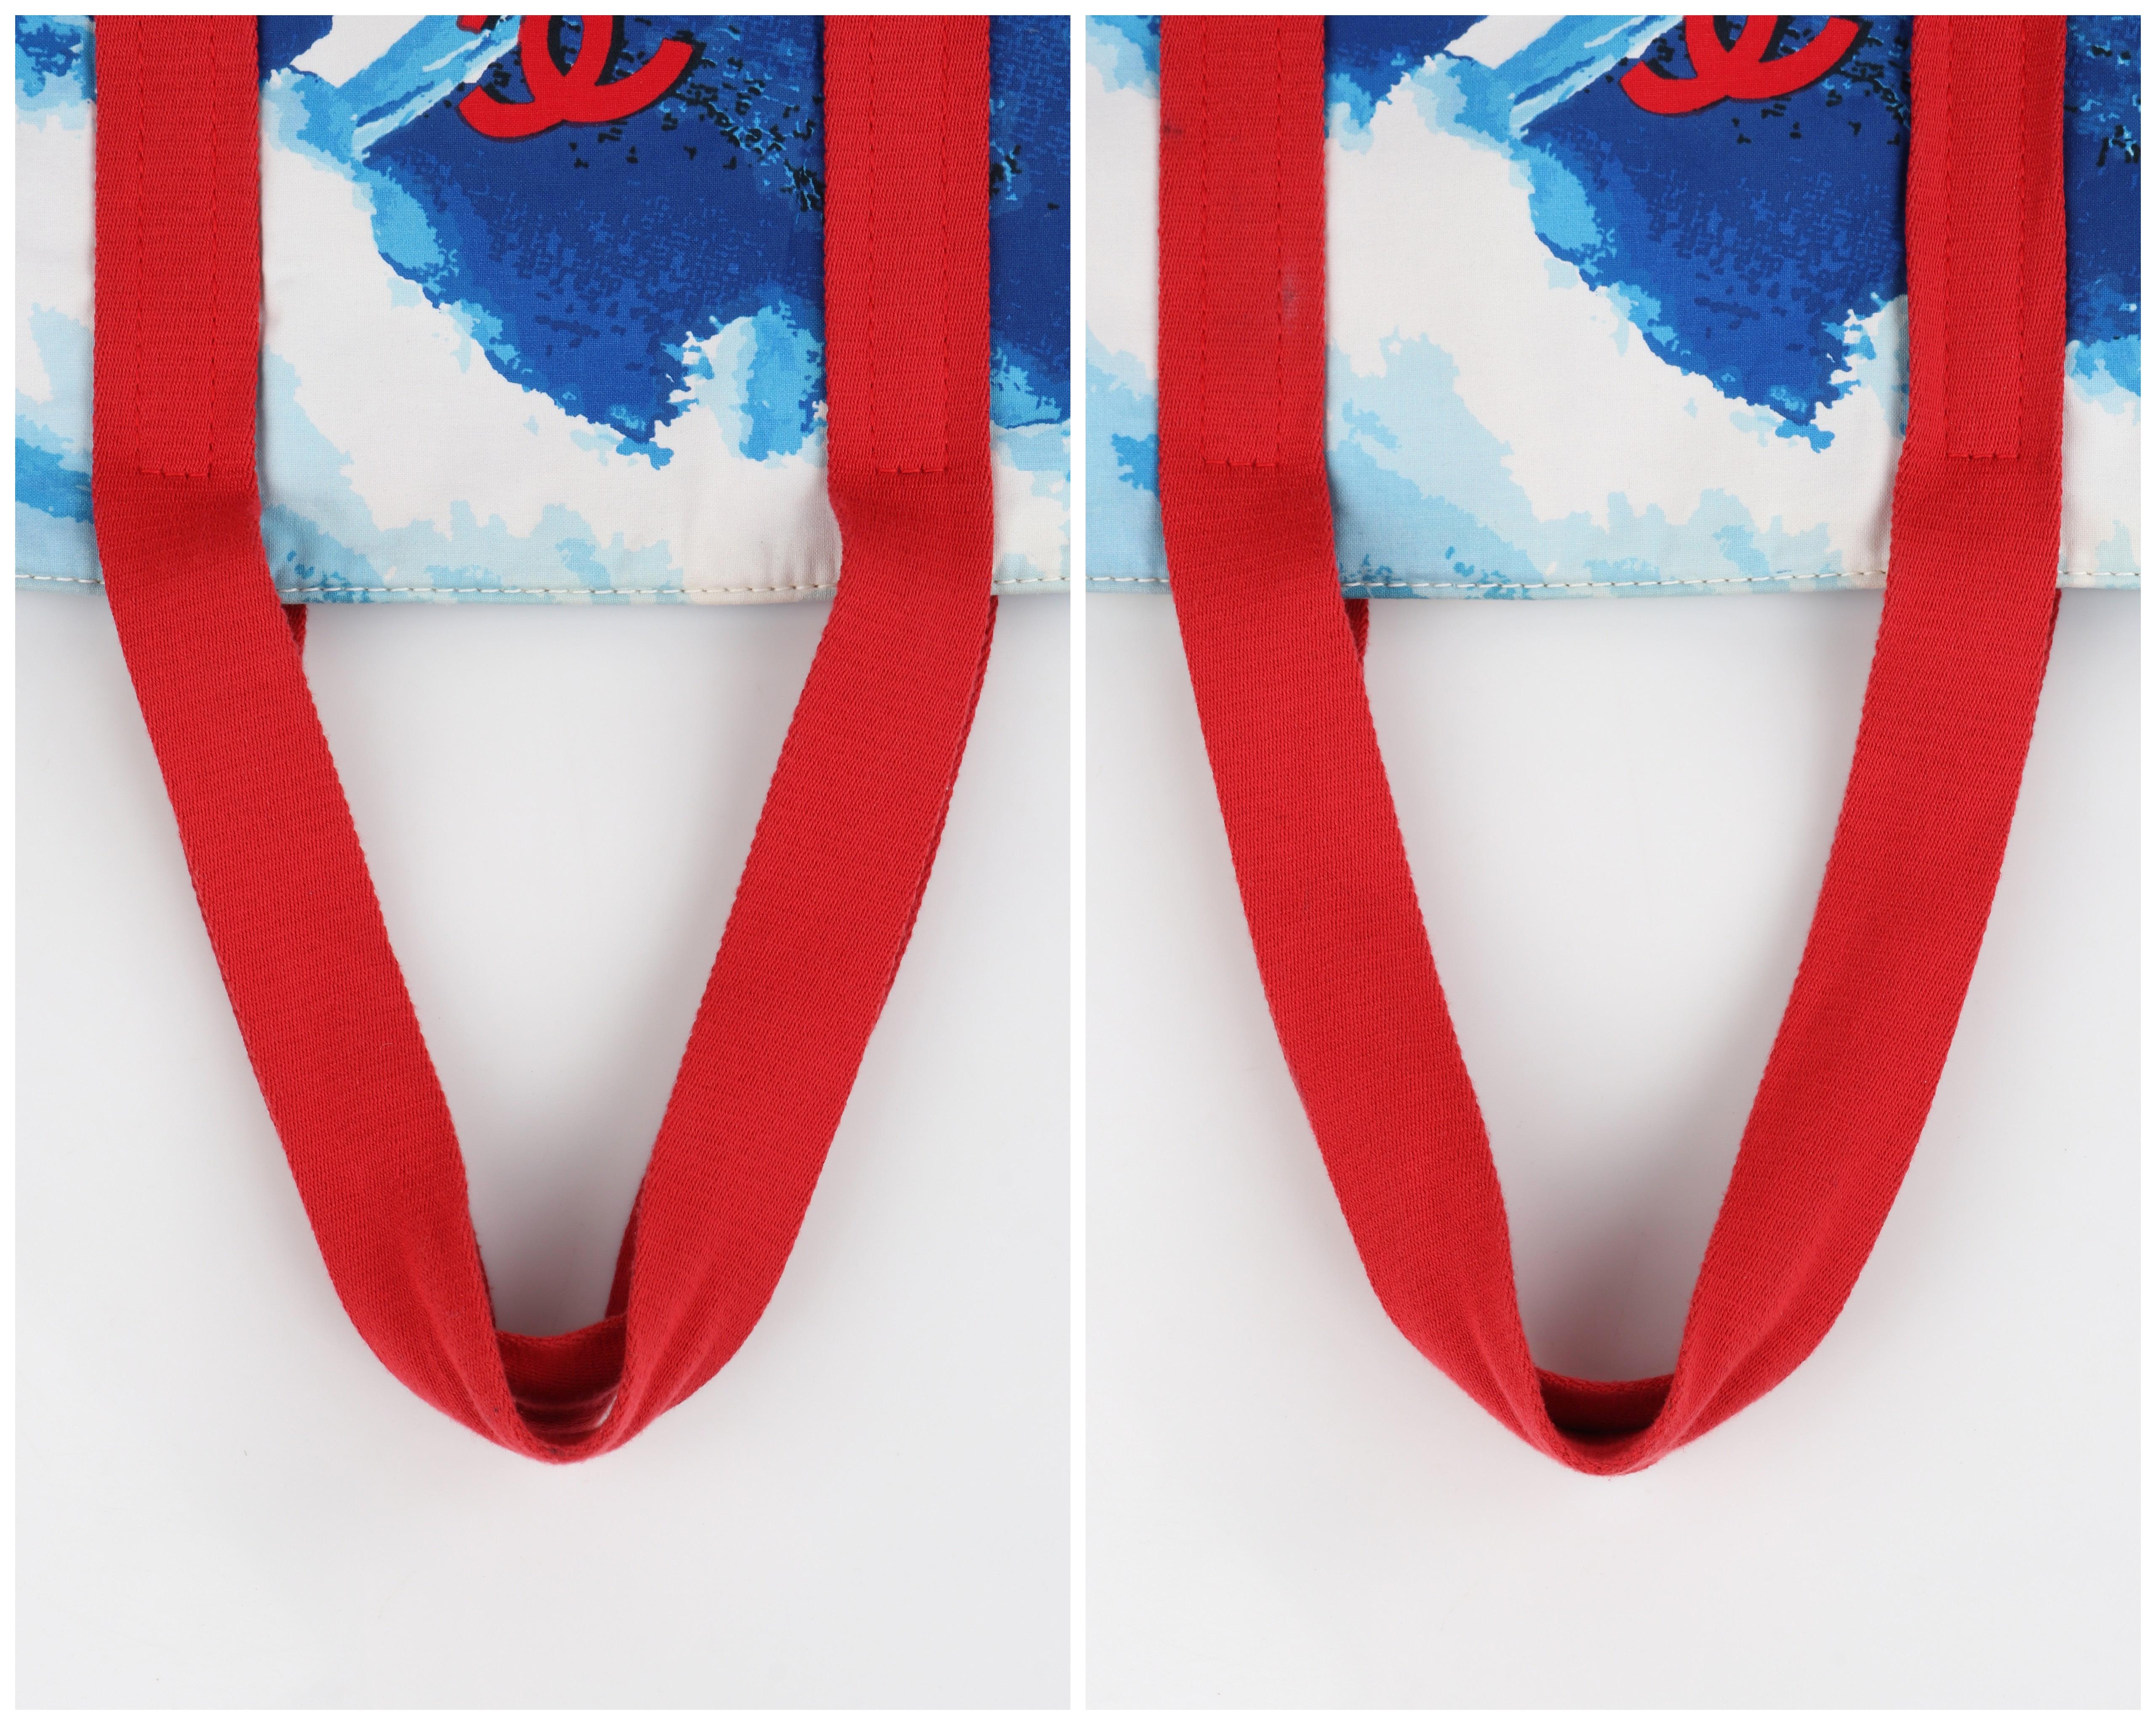 CHANEL c.2002 Red White Blue CC Surf Wave Canvas Beach Bag Large Tote For Sale 2